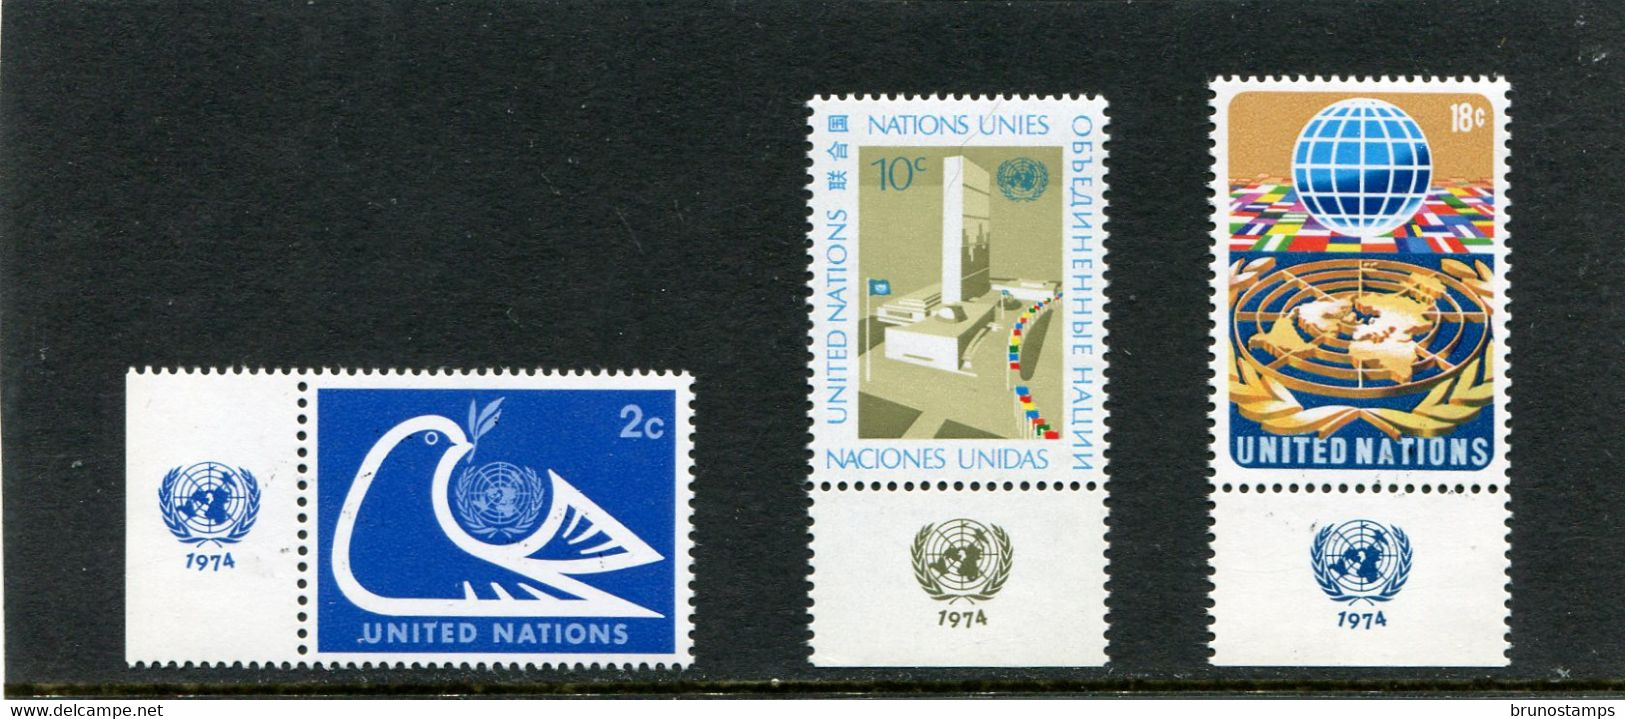 UNITED NATIONS - NEW YORK   - 1974  DEFINITIVE   SET  WITH TABS  MINT NH - Nuevos